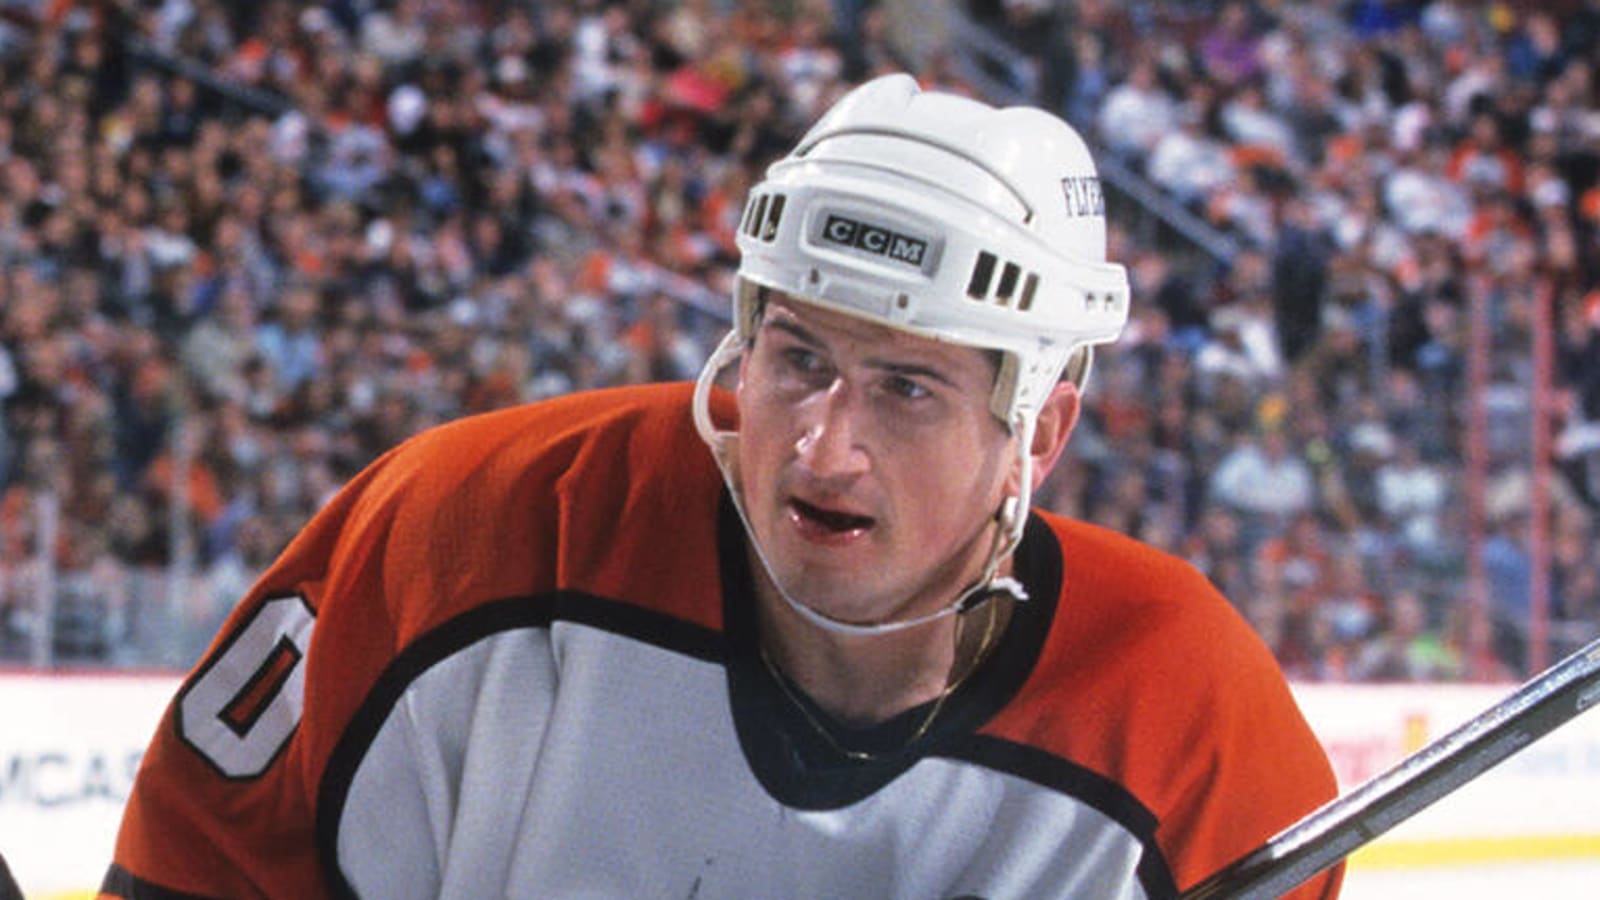 Flyers choice for president looked out of place as a player too